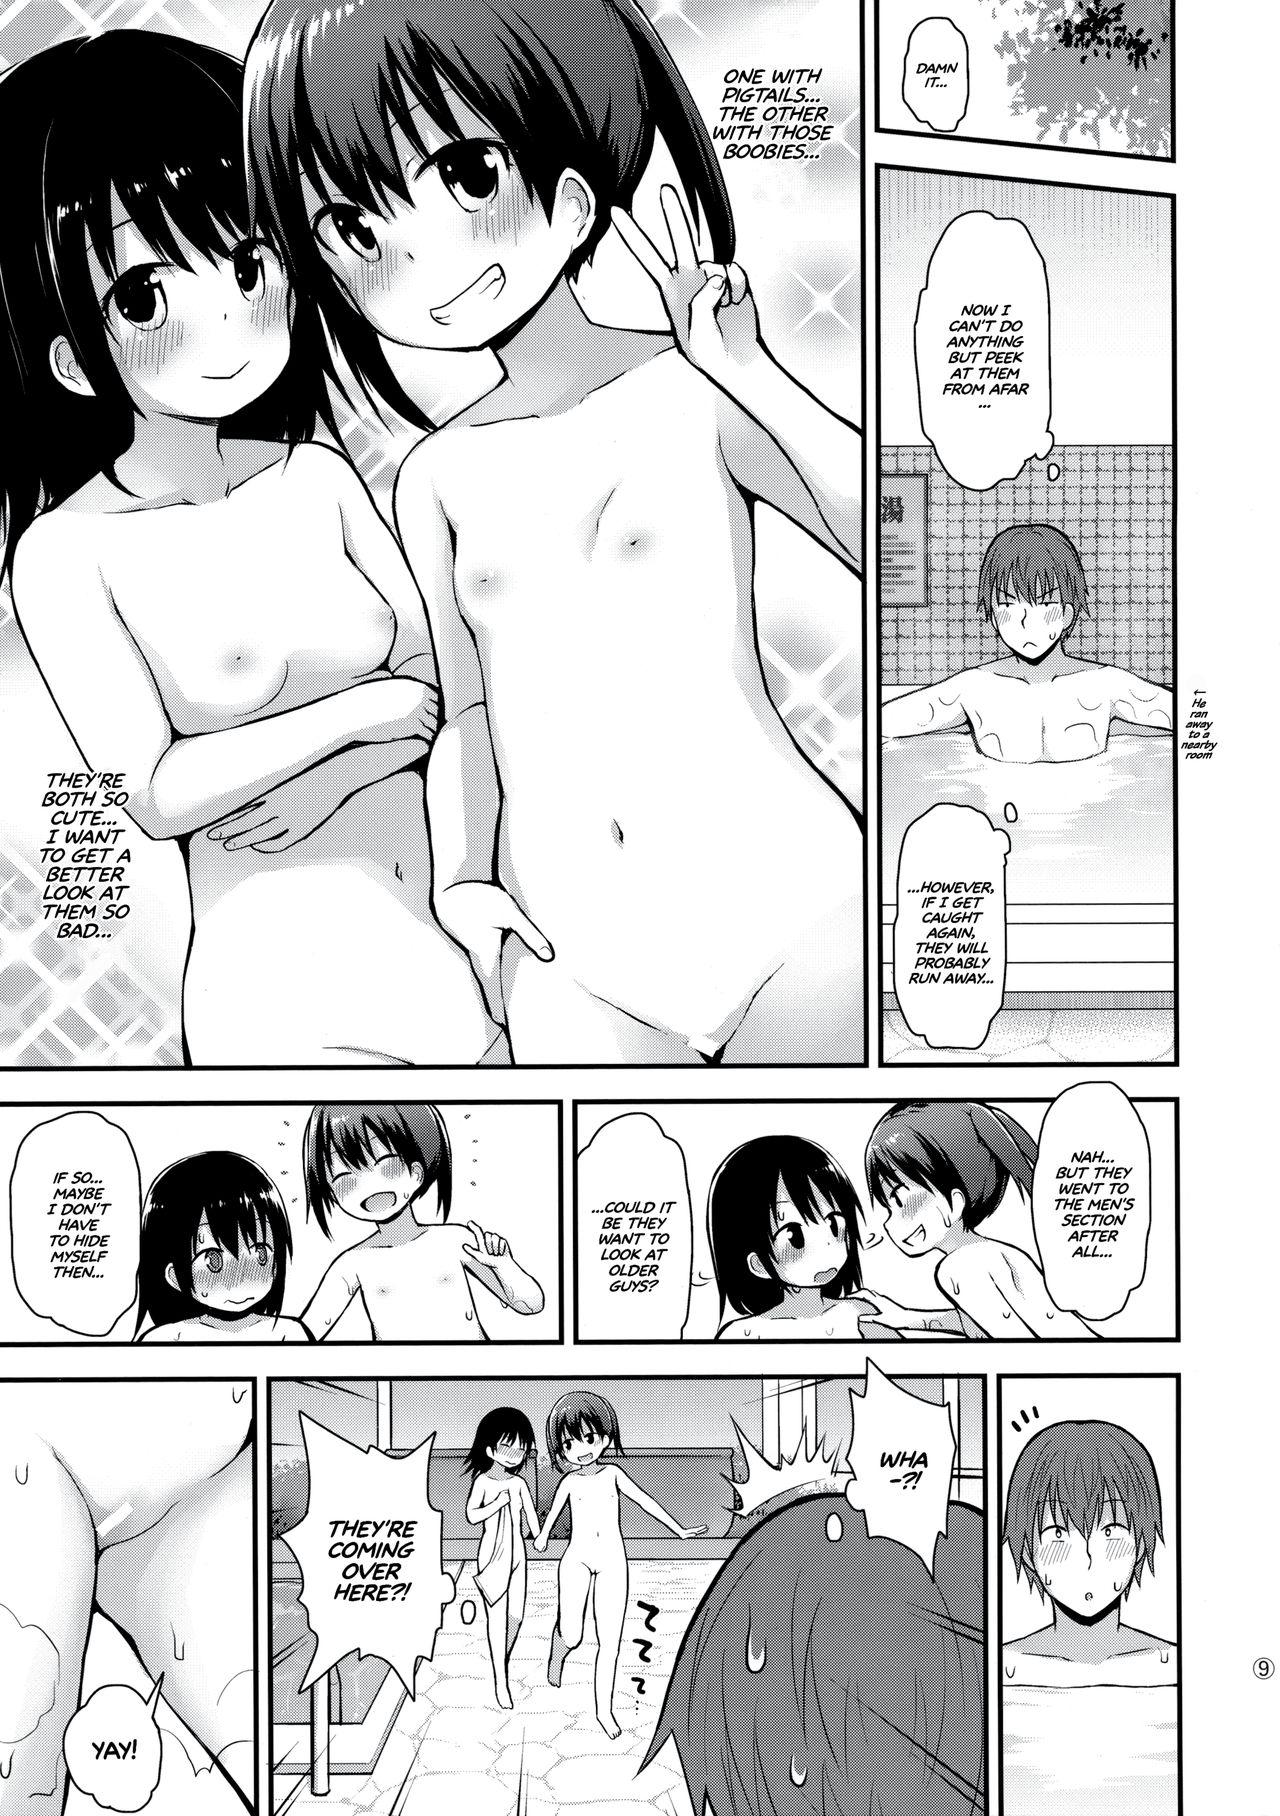 Hogtied Onnanoko datte Otokoyu ni Hairitai | They may just be little girls, but they still want to enter the men's bath! - Original Fucked Hard - Page 8